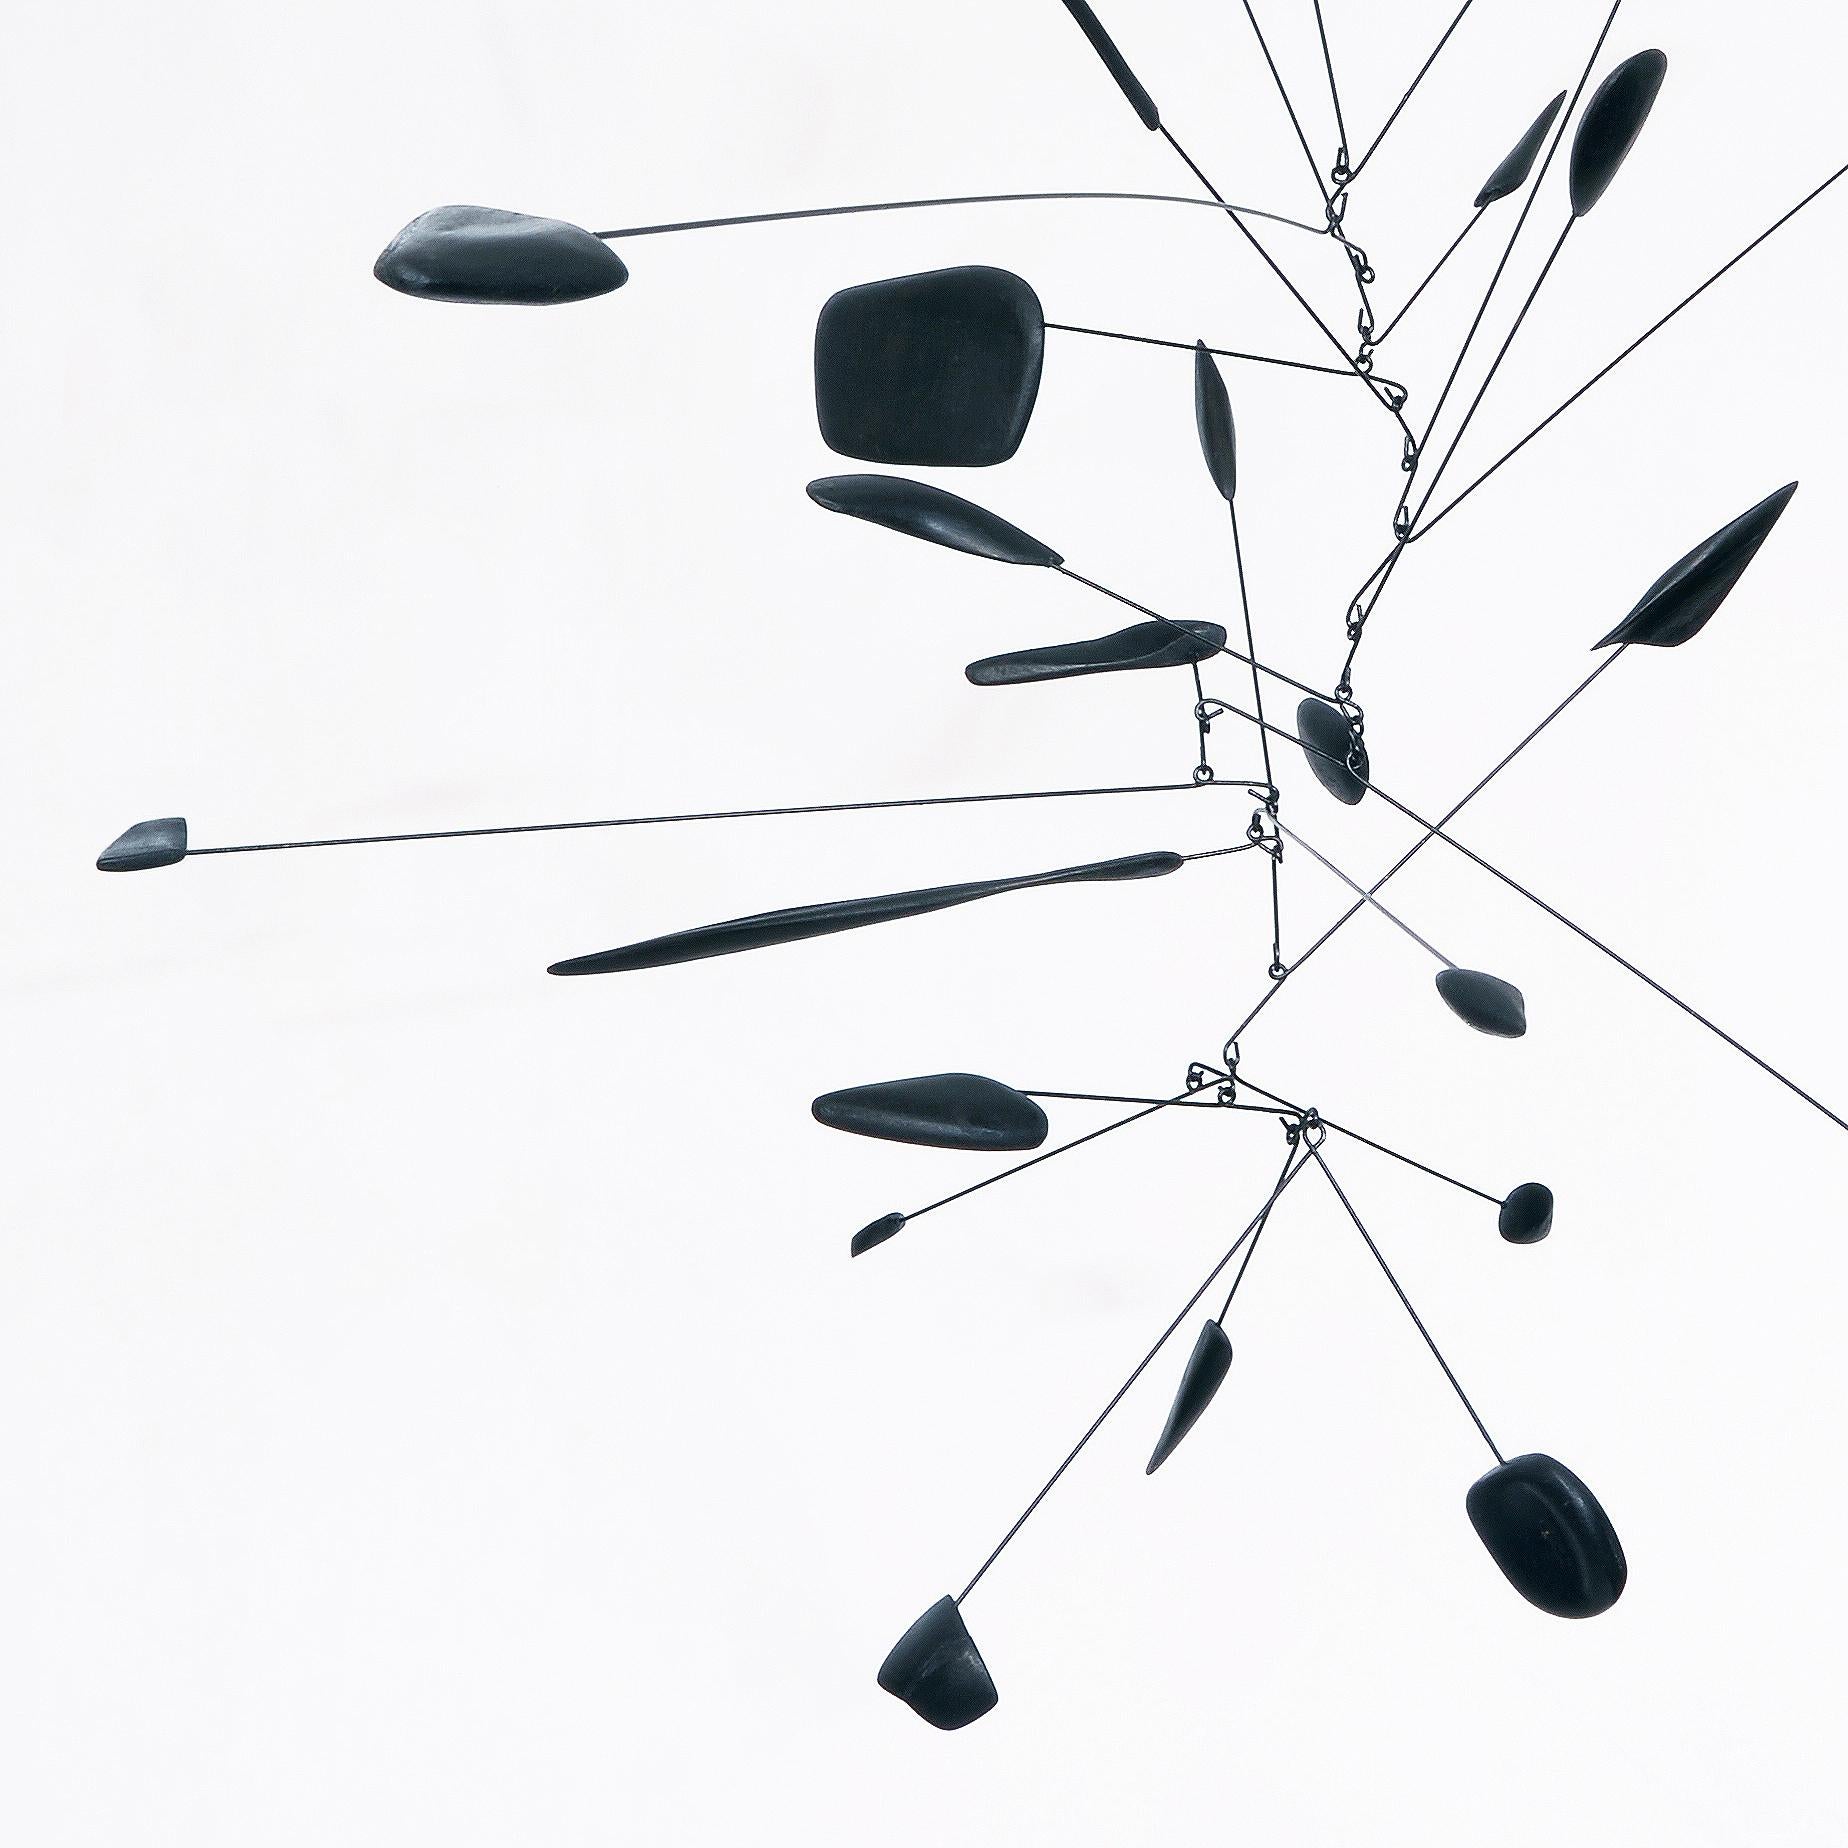 Kinetic Suspended Mobile by Derick Pobell in Black Painted Balsa Wood and Wire